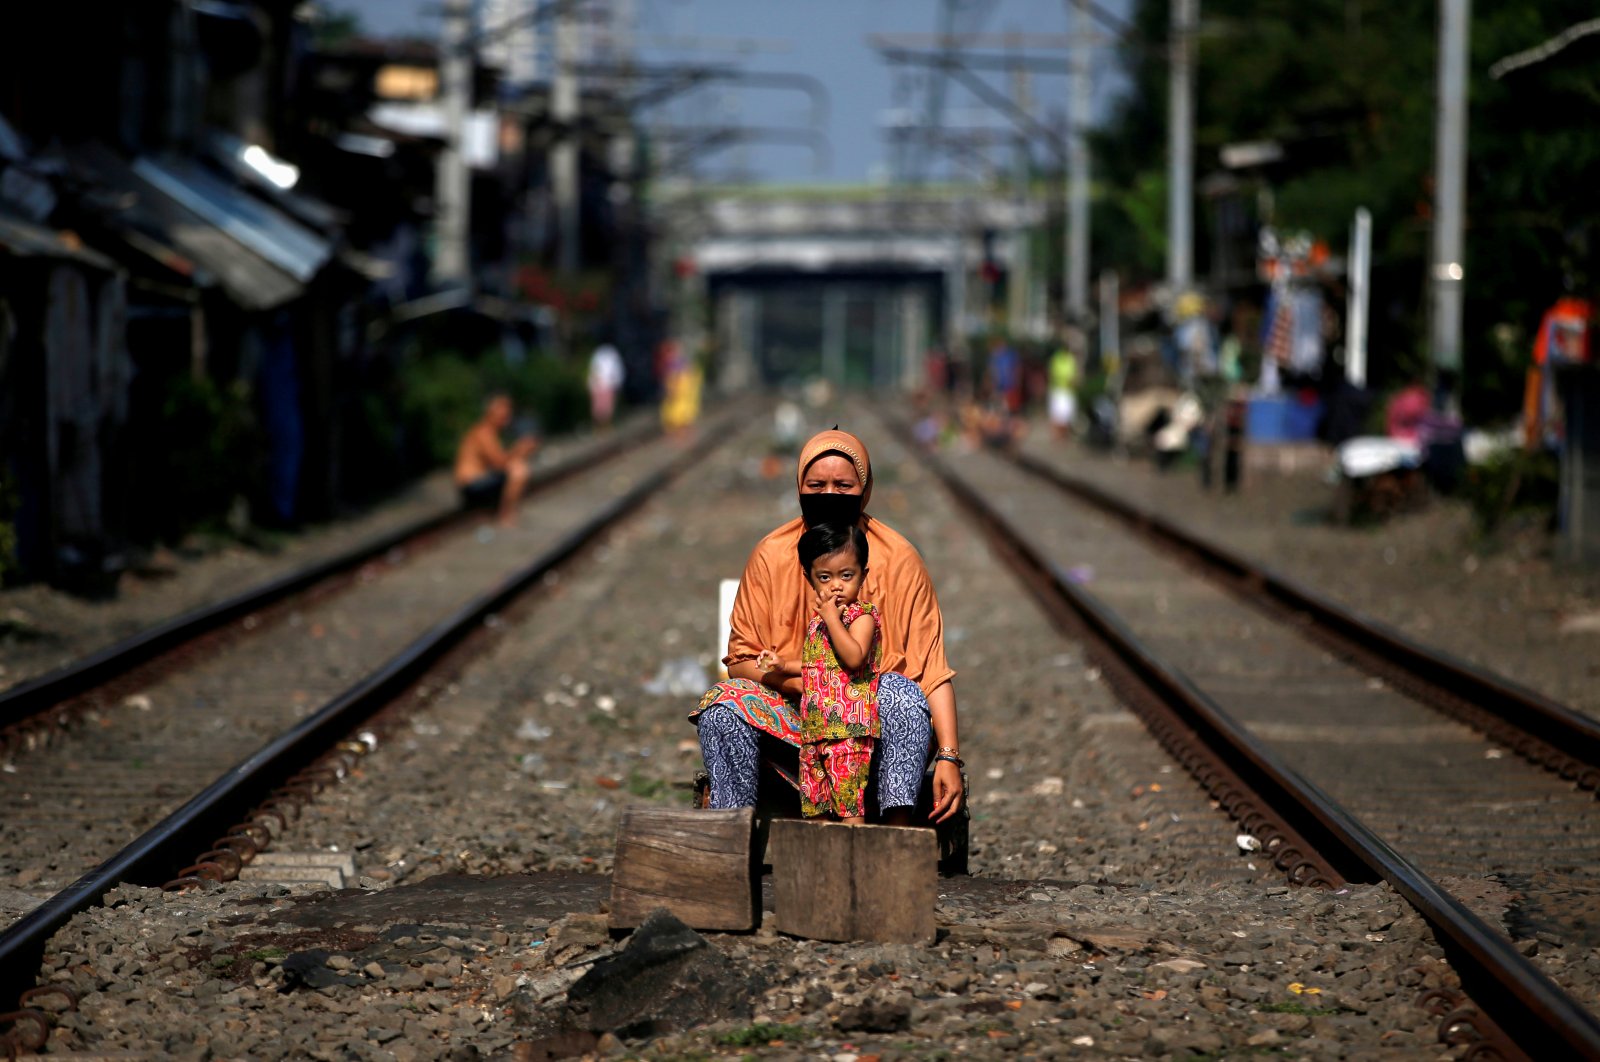 A woman wearing a face mask and a child sit between rail tracks, during the imposition of large-scale social restrictions by the government to prevent the spread of the coronavirus disease in Jakarta, Indonesia, April 12, 2020. (Reuters Photo)